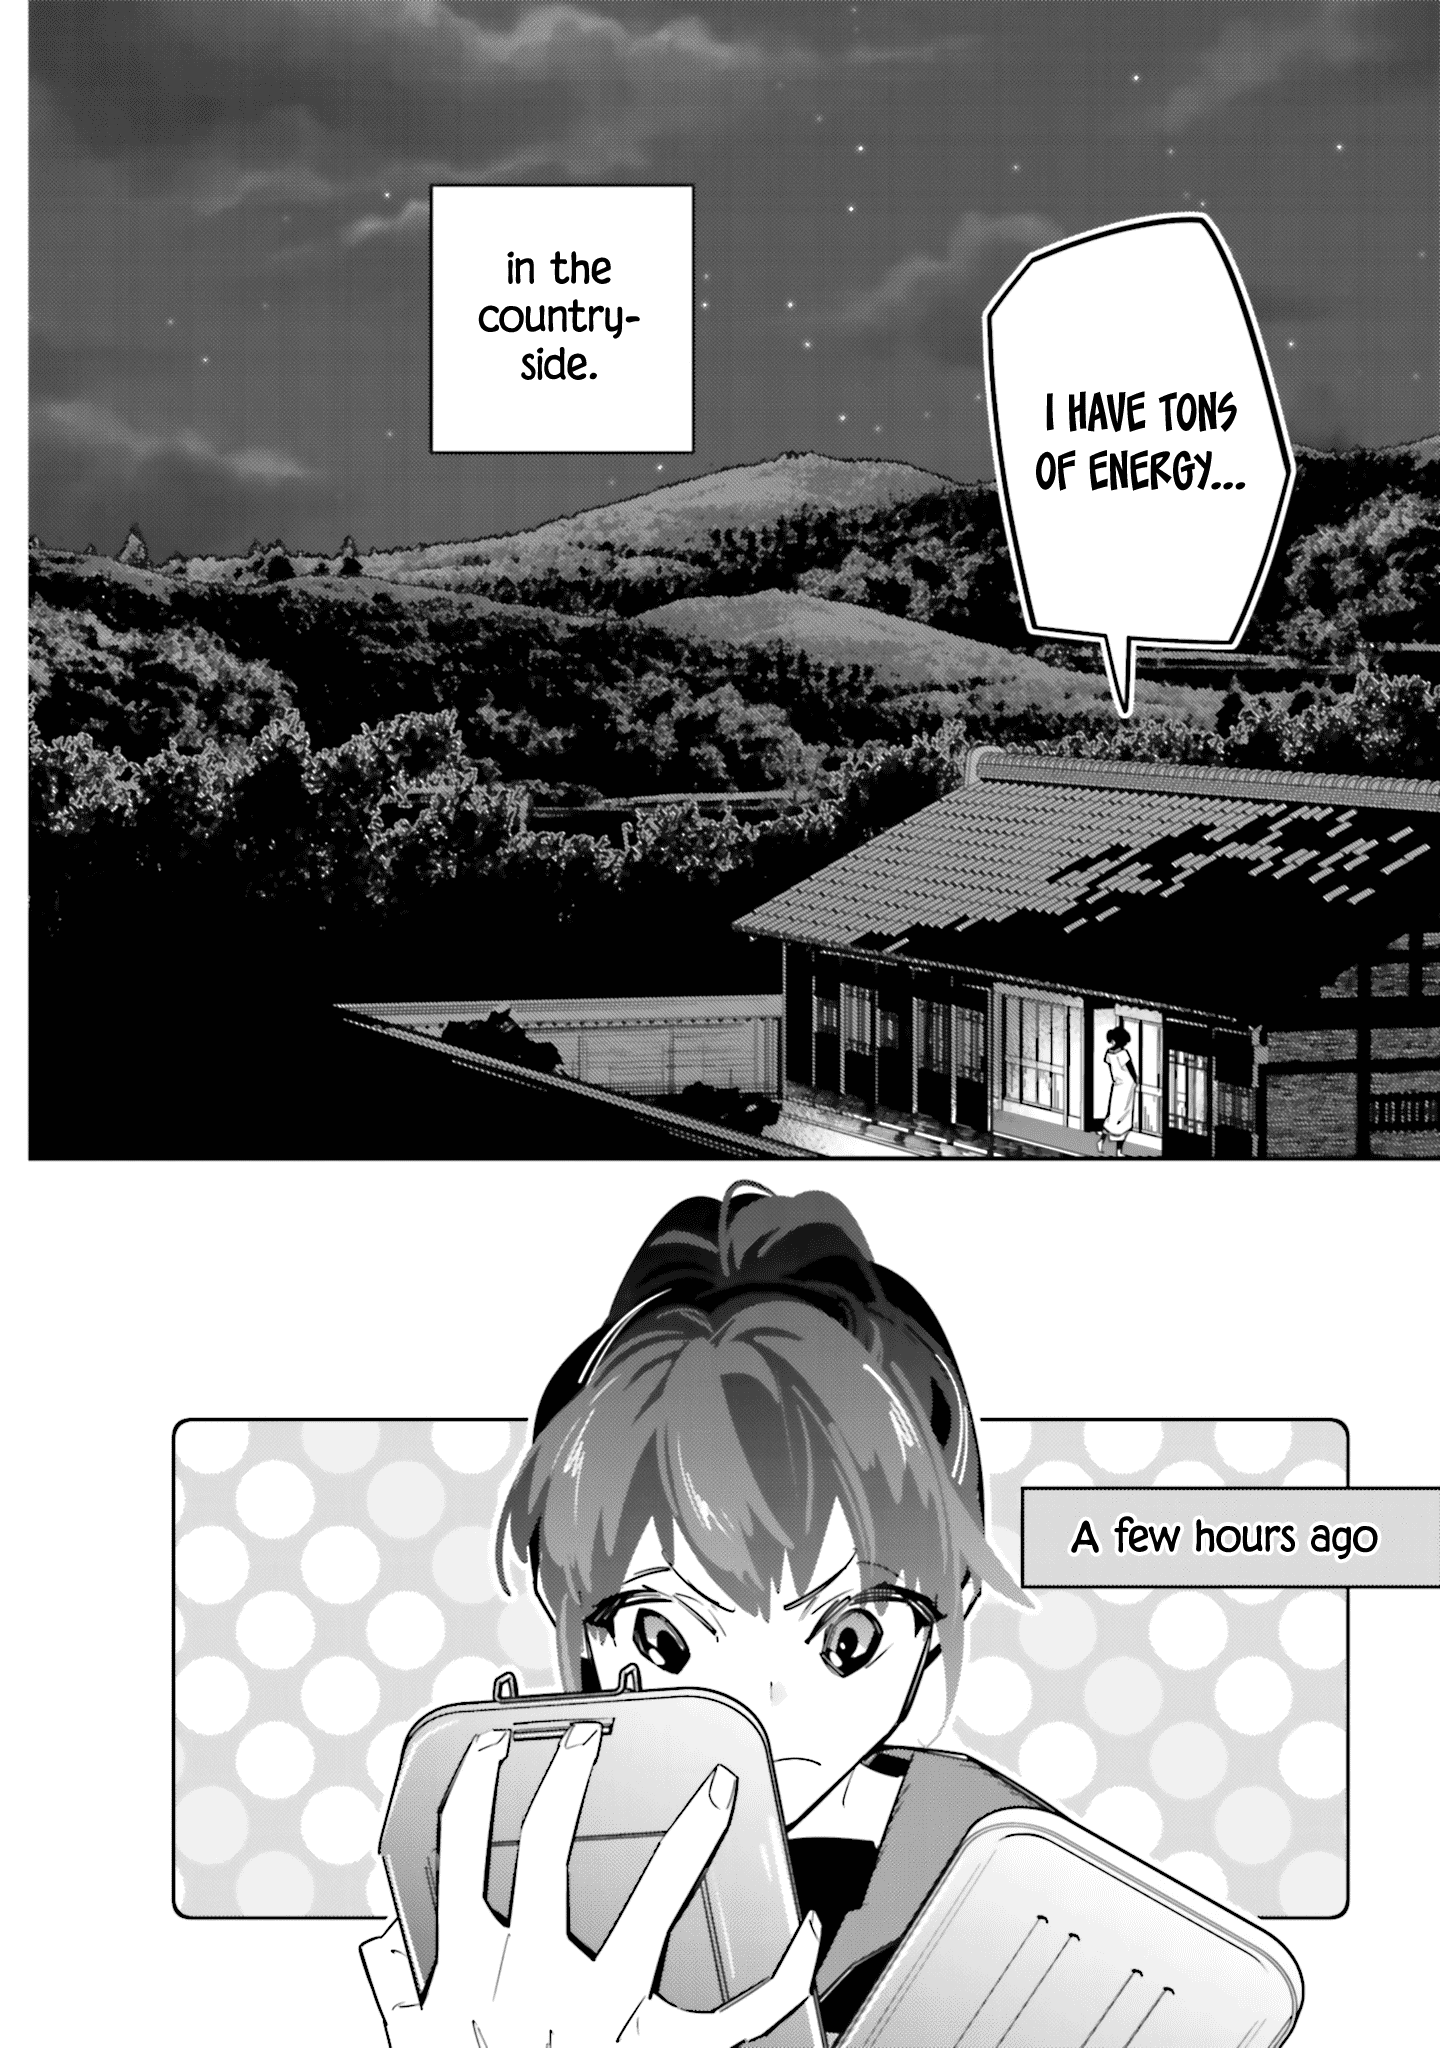 I Reincarnated As The Little Sister Of A Death Game Manga's Murder Mastermind And Failed Chapter 3 #2